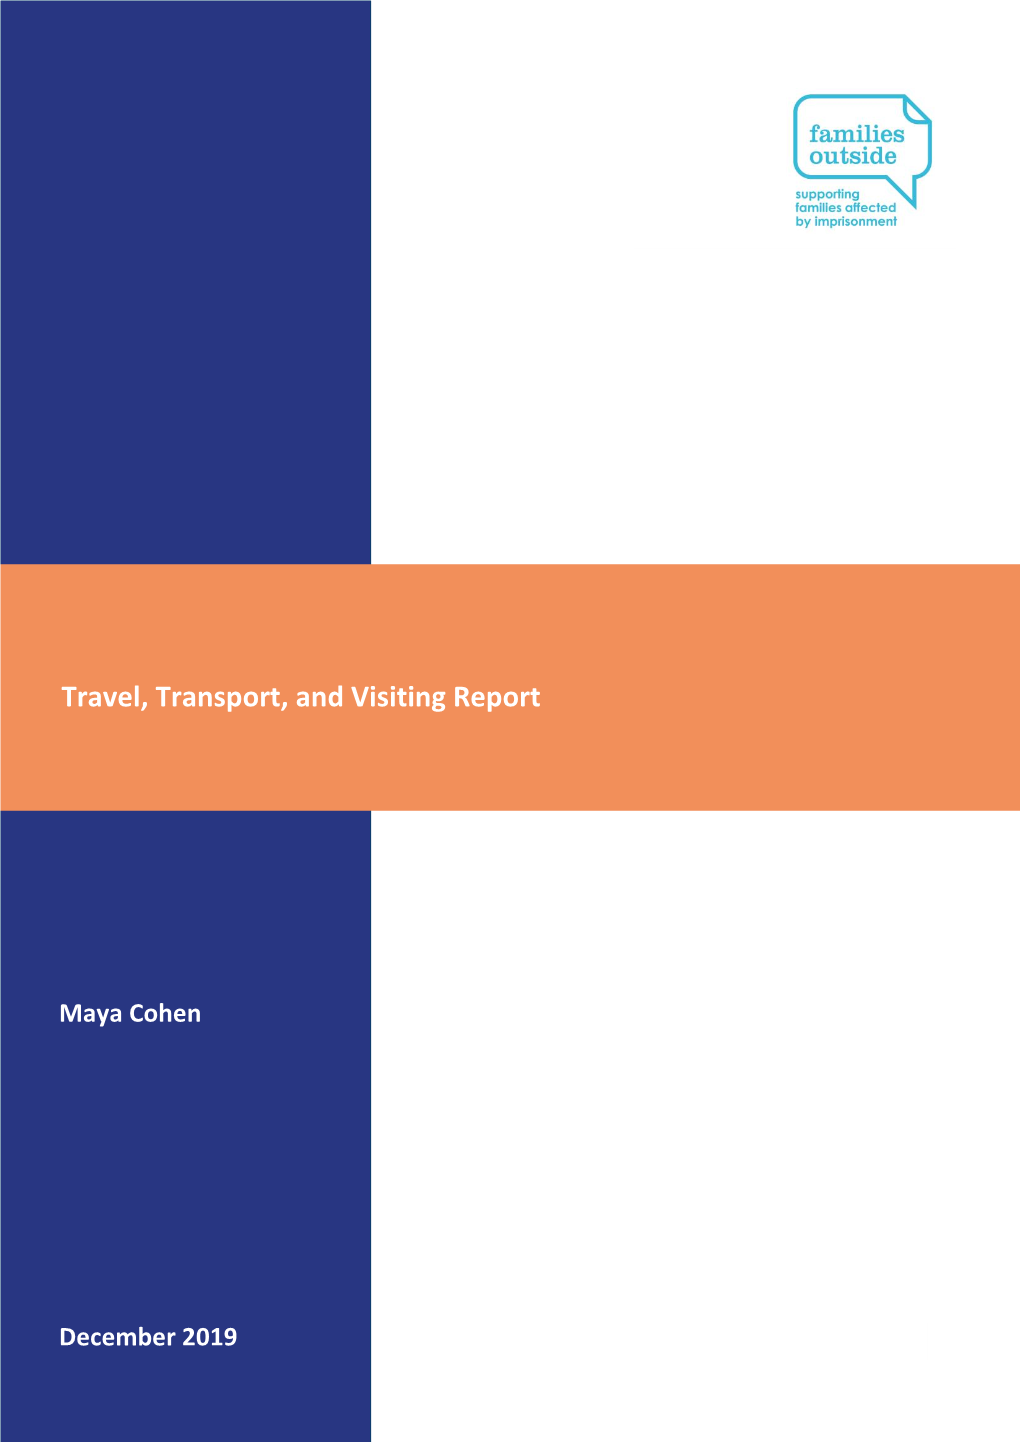 Travel, Transport, and Visiting Report 2019 This Report